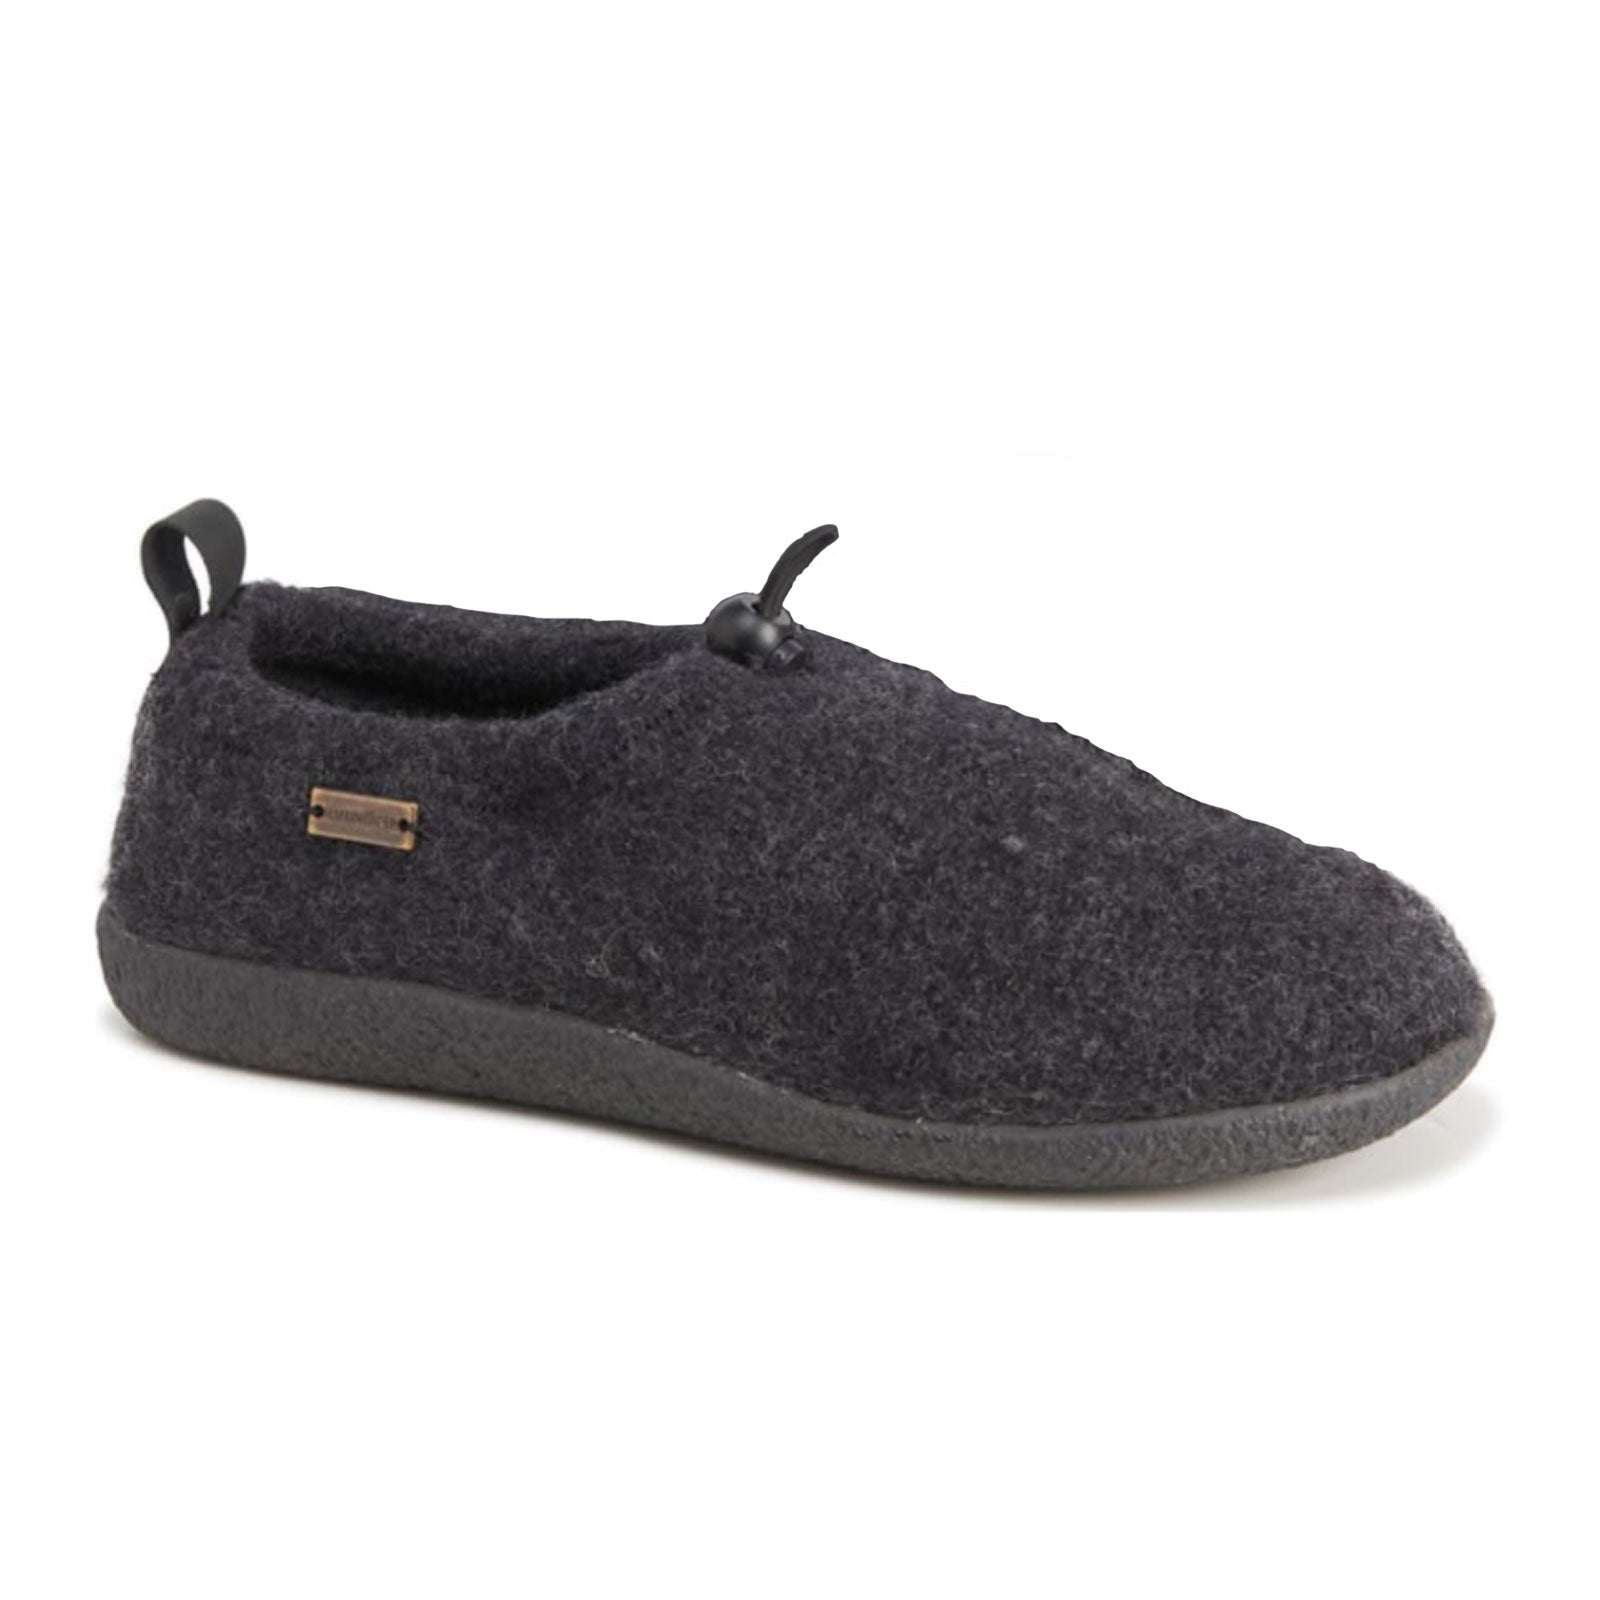 Haflinger Guido Slipper (Unisex) - Charcoal Dress-Casual - Slippers - The Heel Shoe Fitters